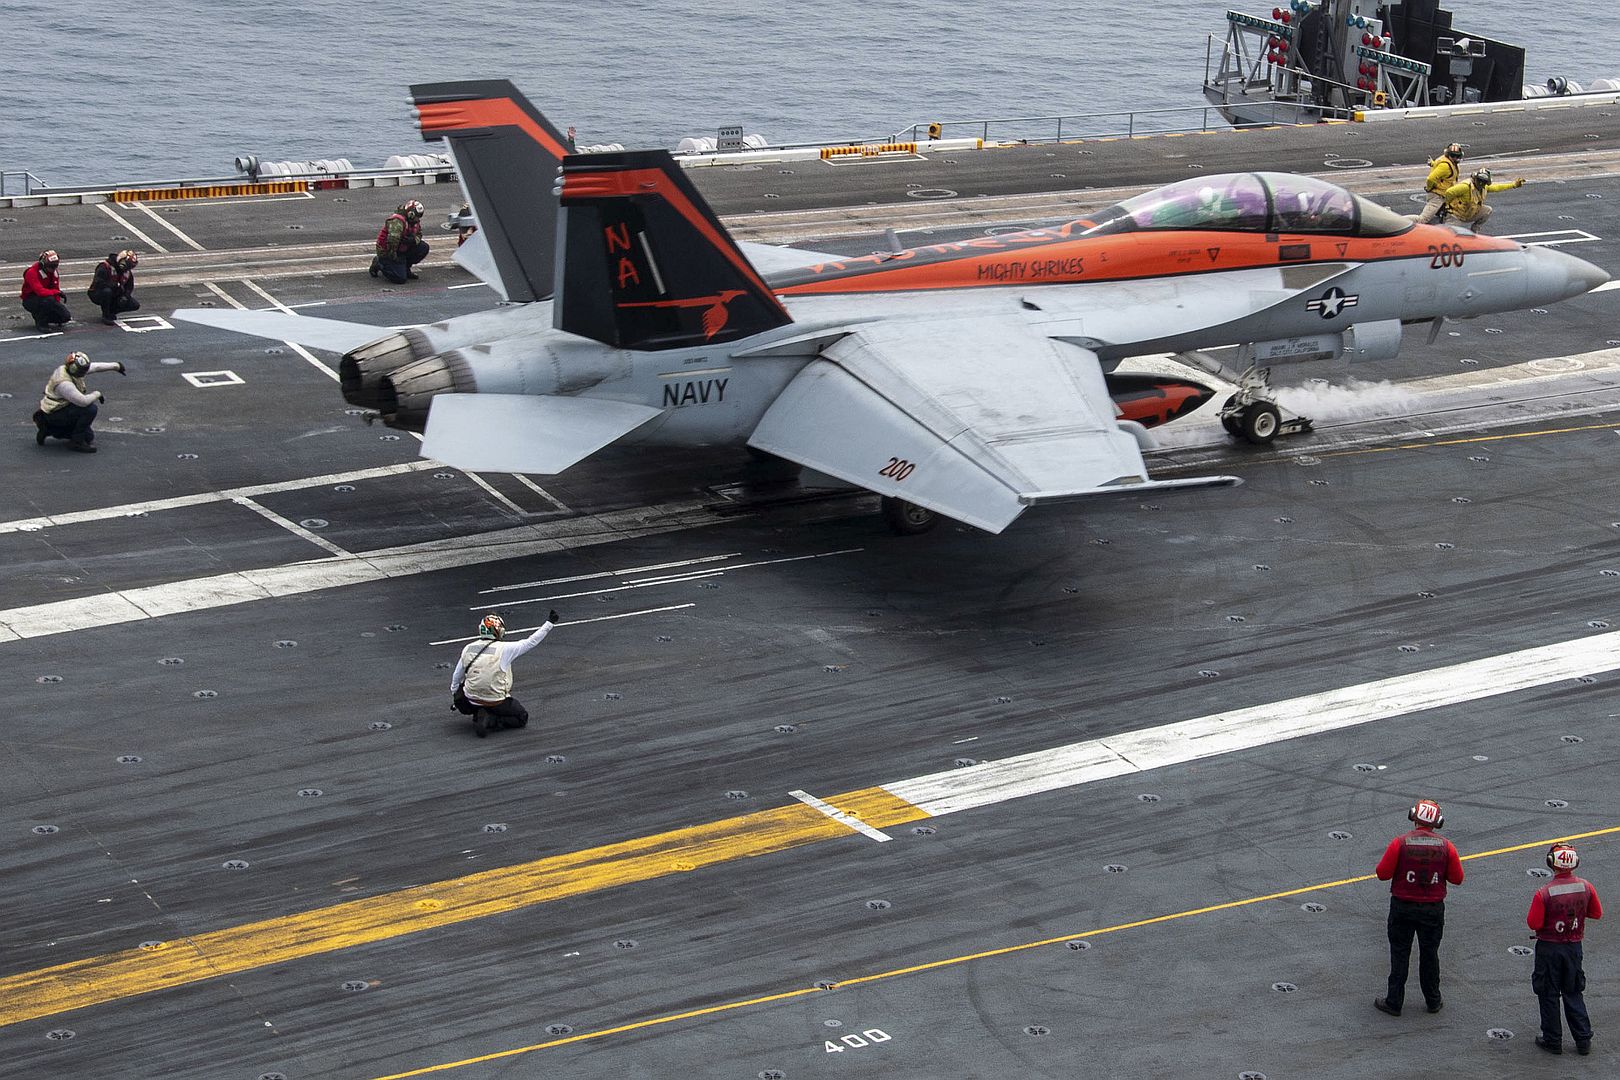 18E Super Hornet From The Mighty Shrikes Of Strike Fighter Squadron 94 Begins To Launch From The Flight Deck Of The Aircraft Carrier USS Nimitz